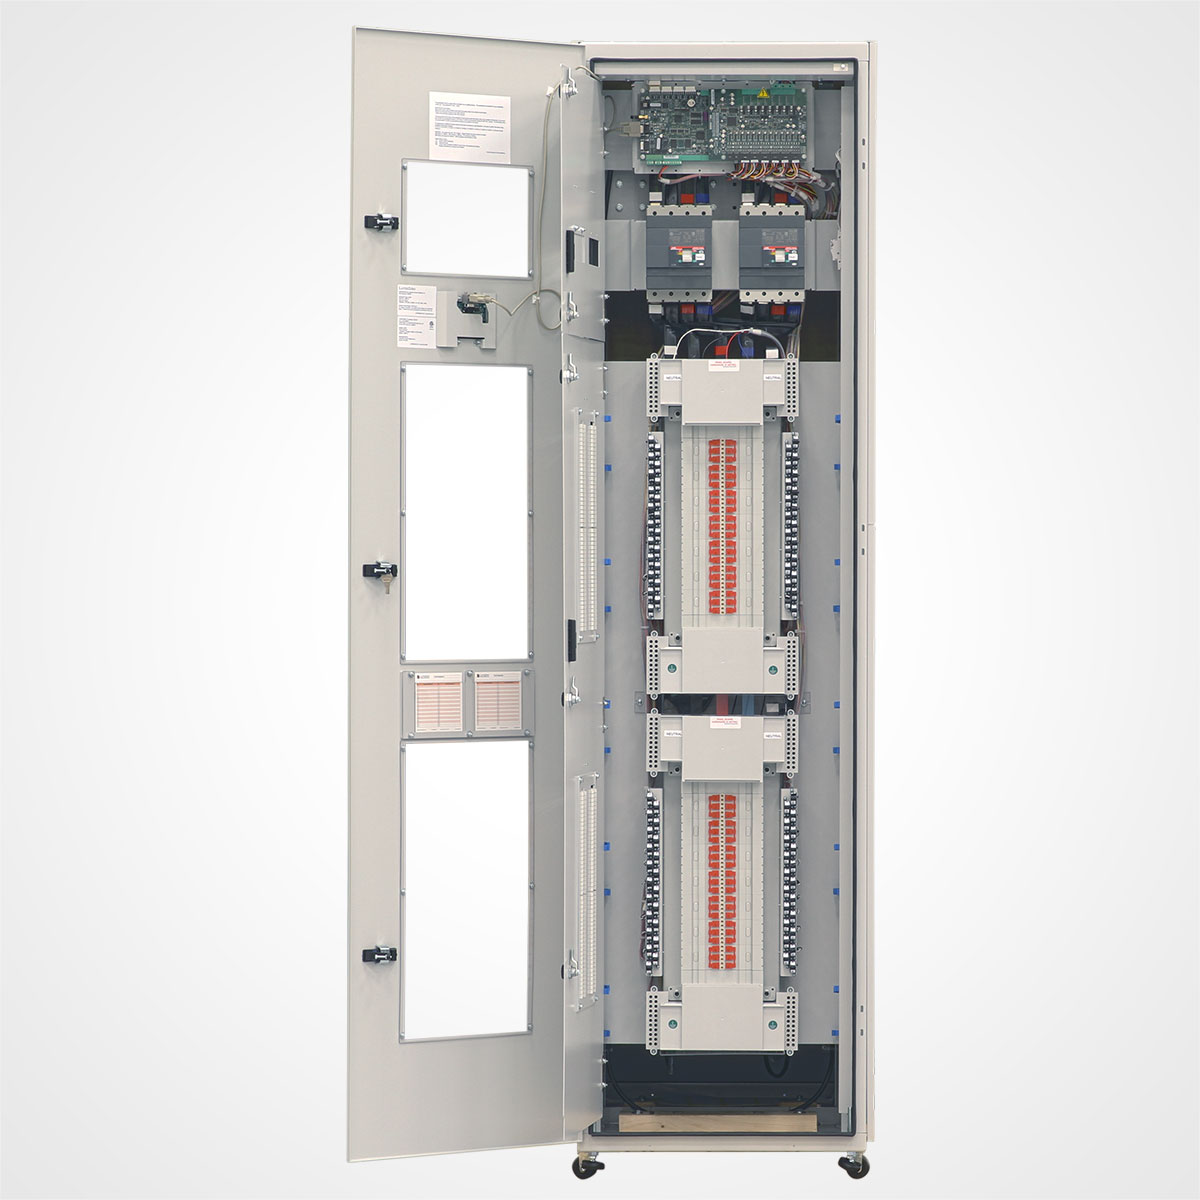 The LayerZero Series 70: eRPP Remote Power Panel with All Doors Open.